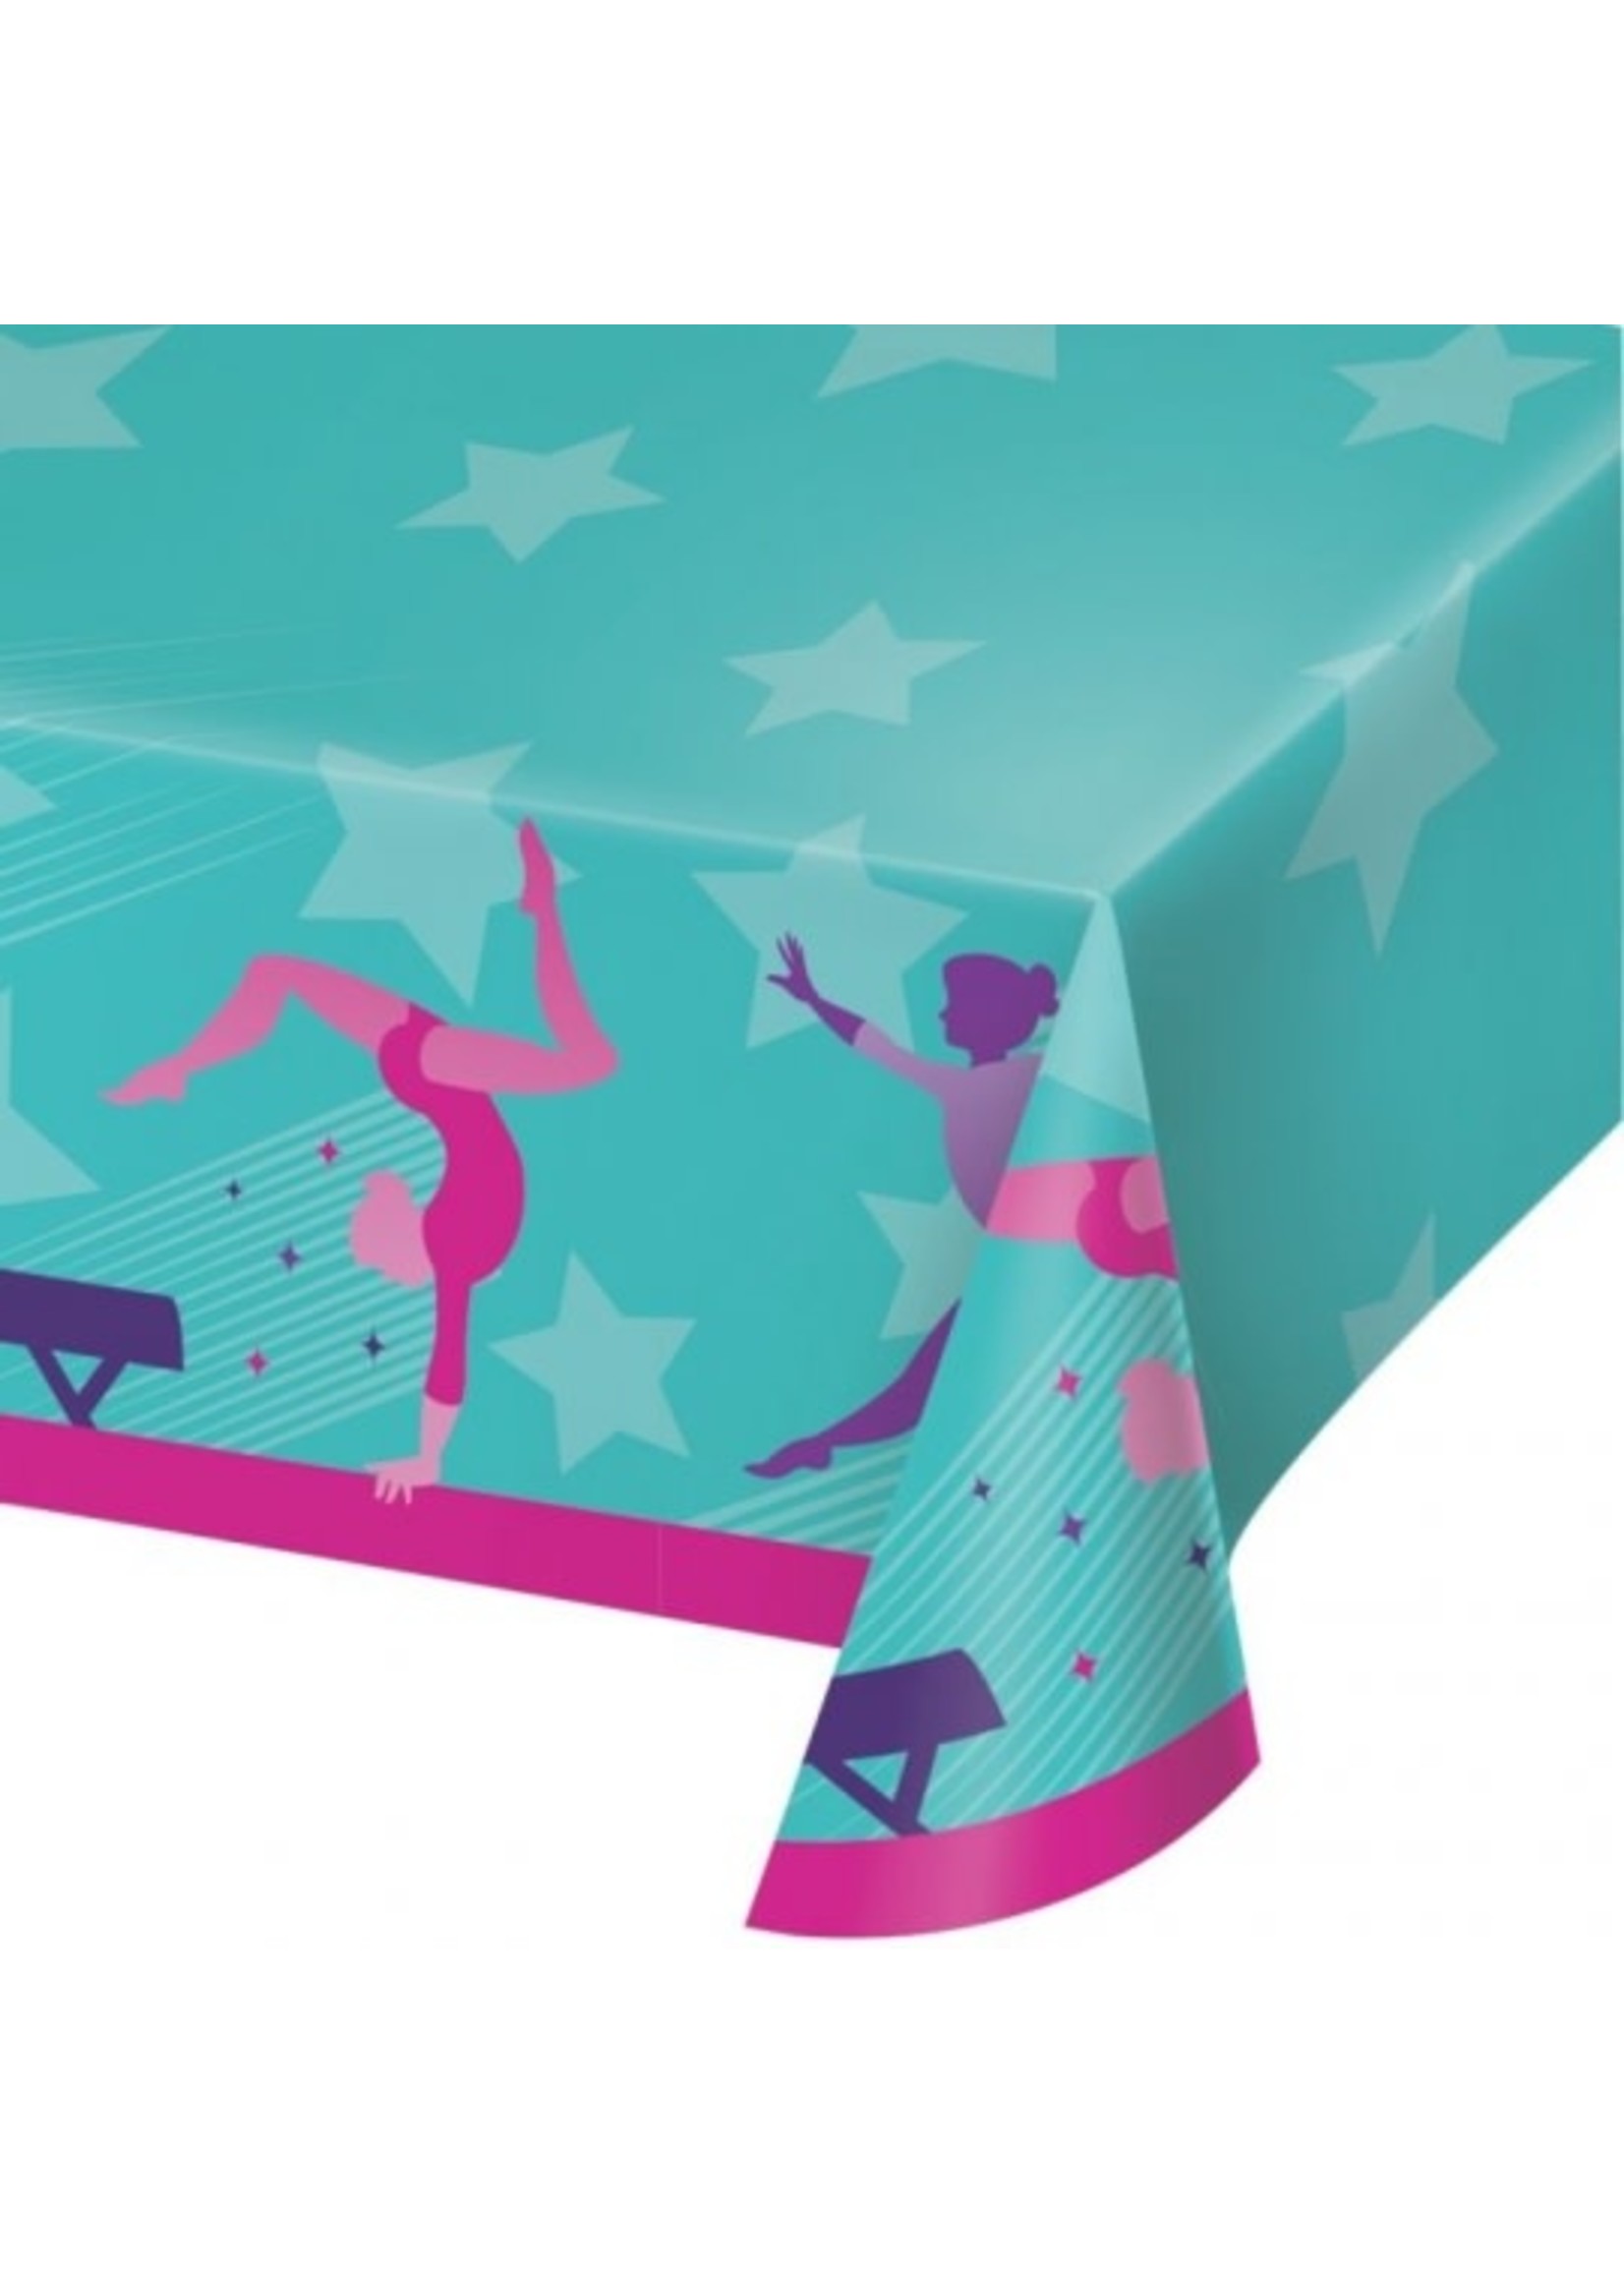 Creative Converting Gymnastics Party Table Cover